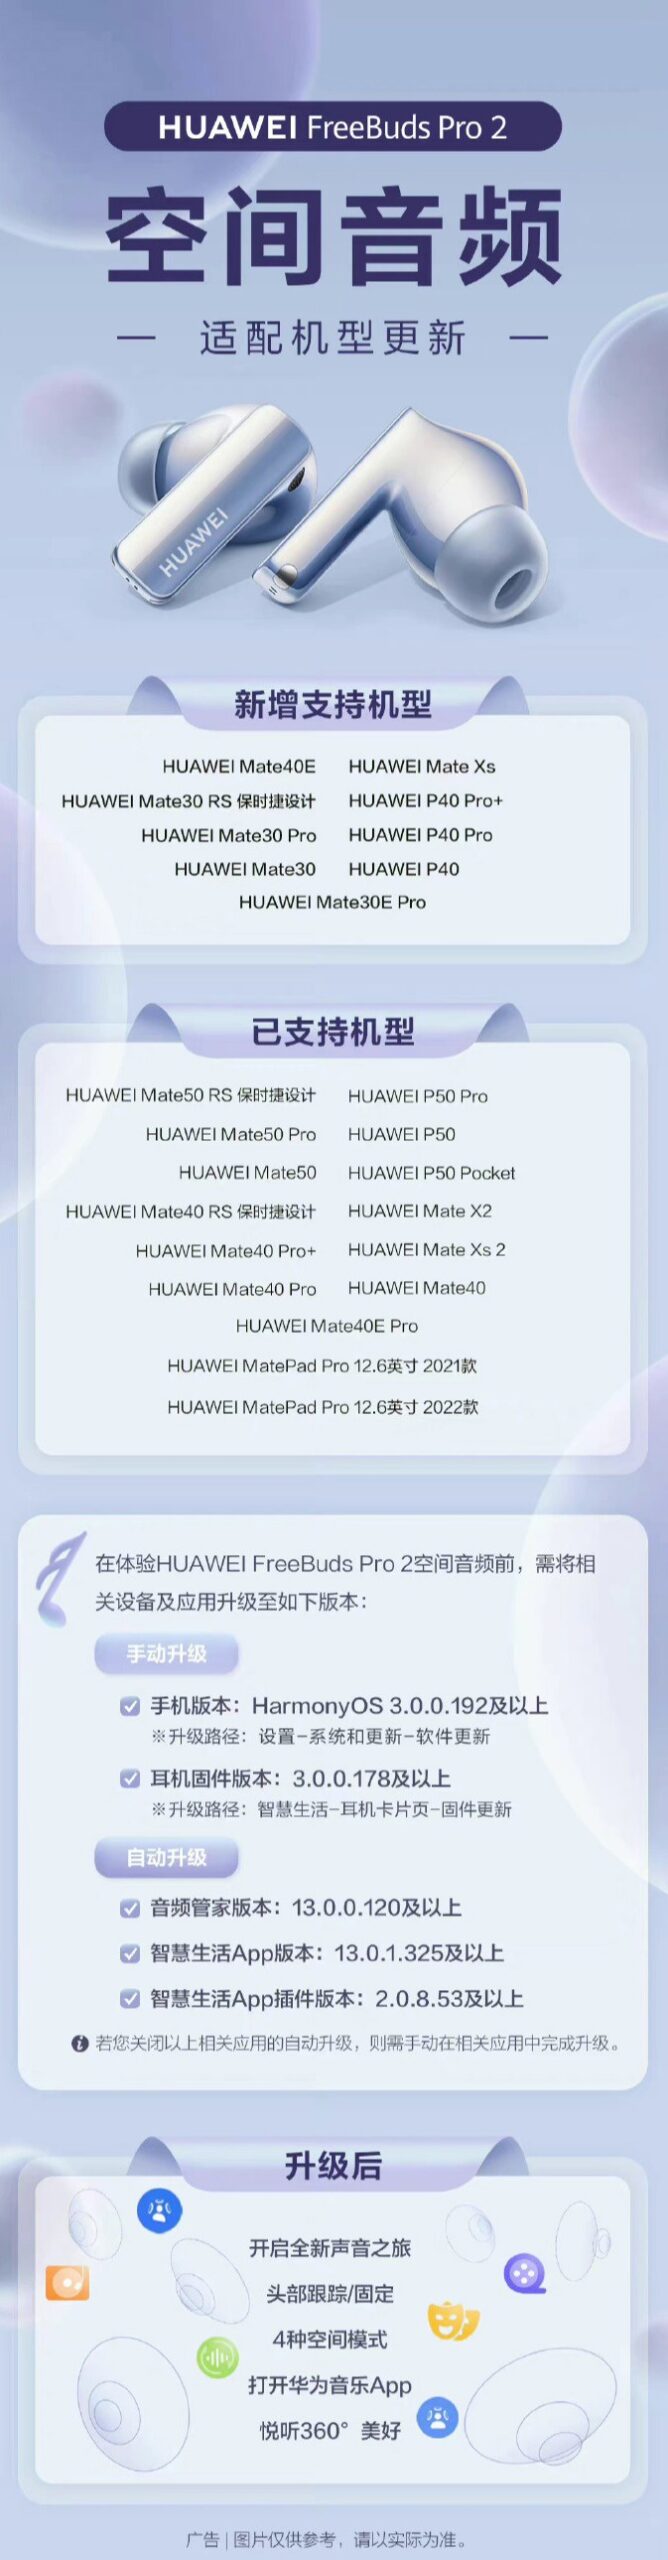 These Huawei phones now support FreeBuds Pro 2 spatial audio feature